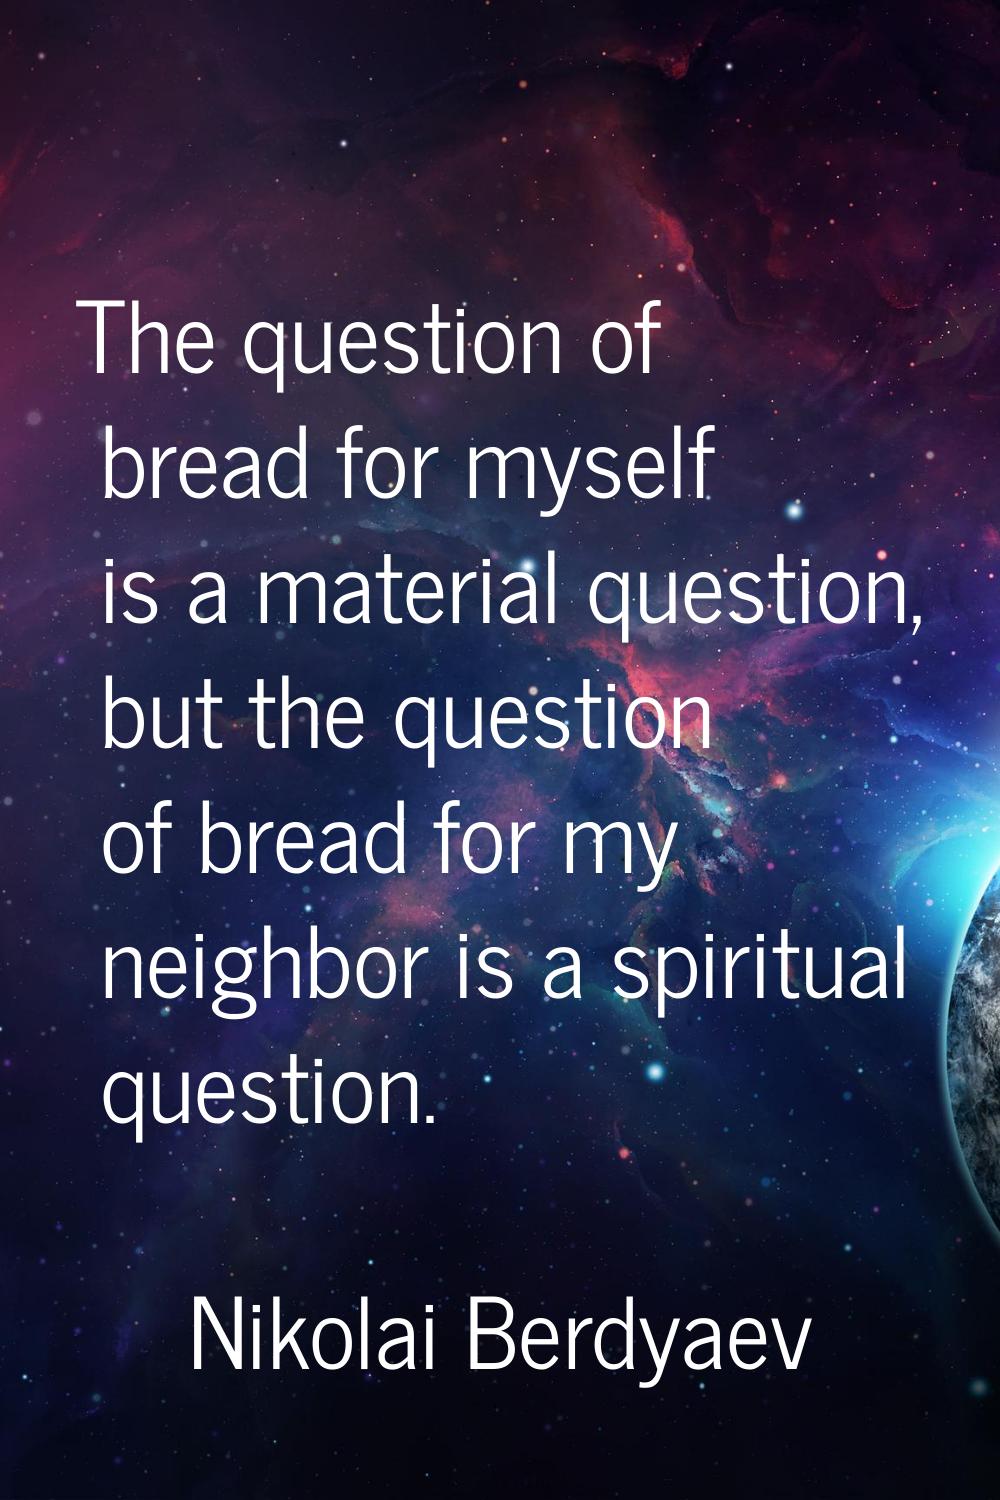 The question of bread for myself is a material question, but the question of bread for my neighbor 